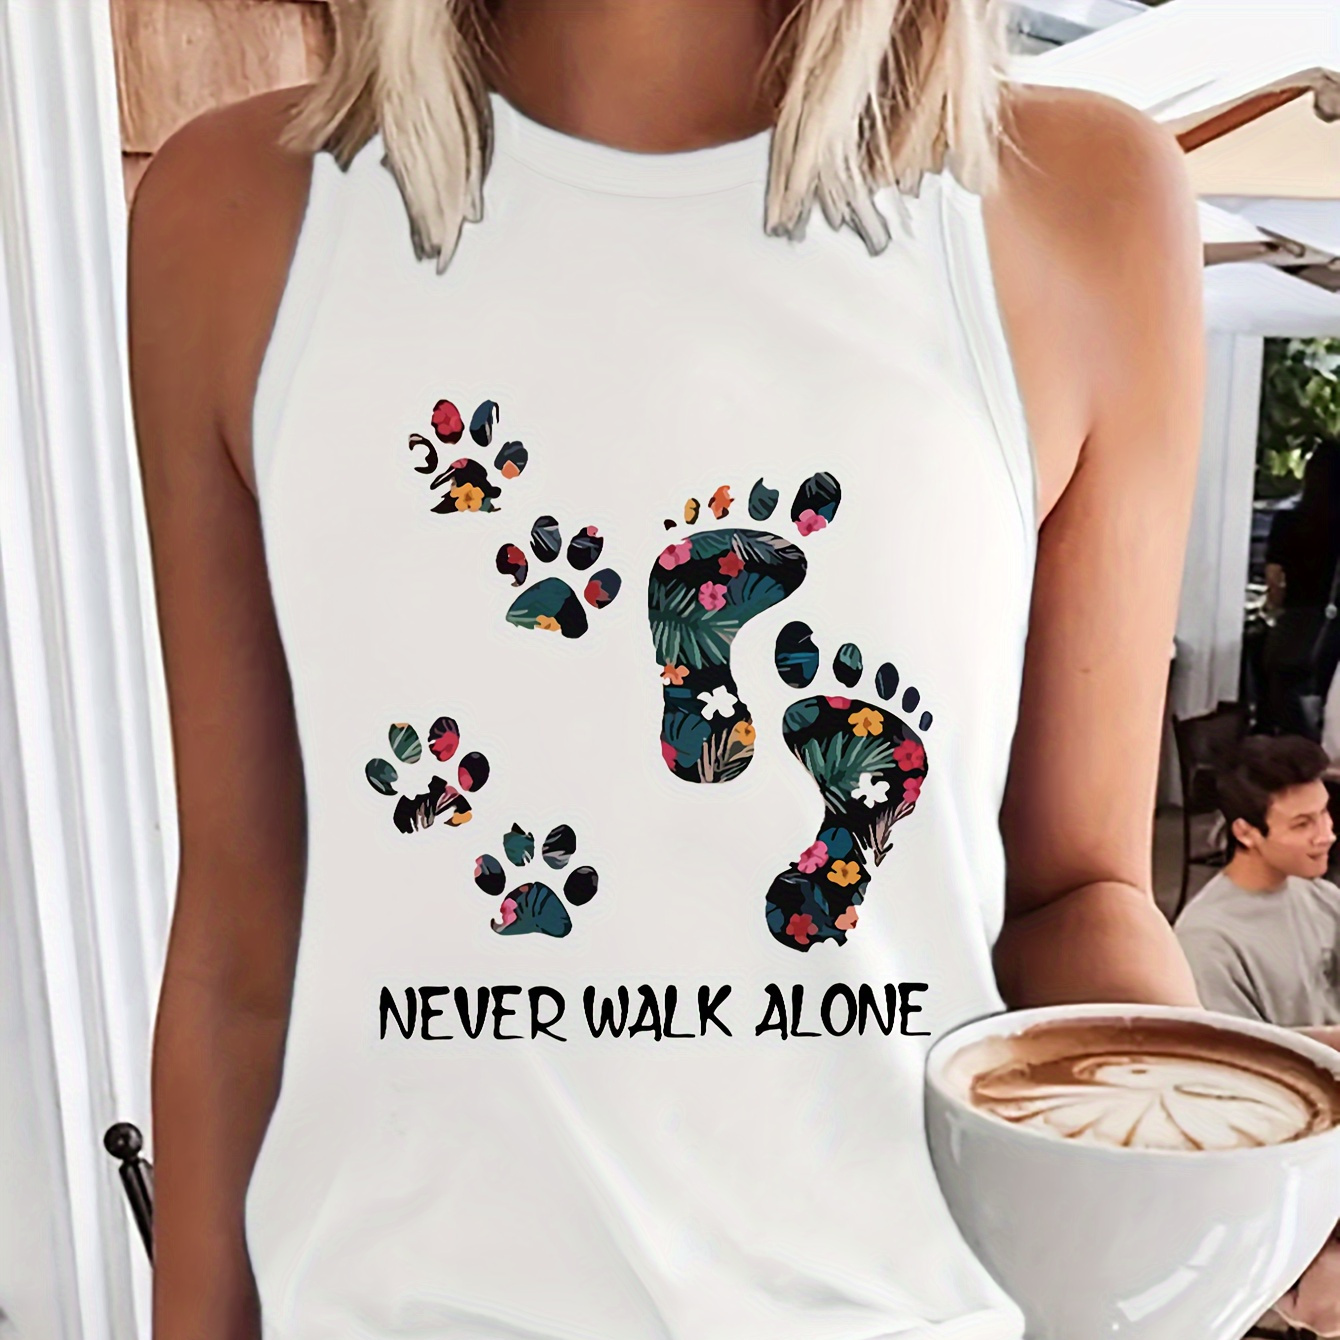 

Never Walk Alone Print Tank Top, Sleeveless Crew Neck Casual Top For Summer & Spring, Women's Clothing